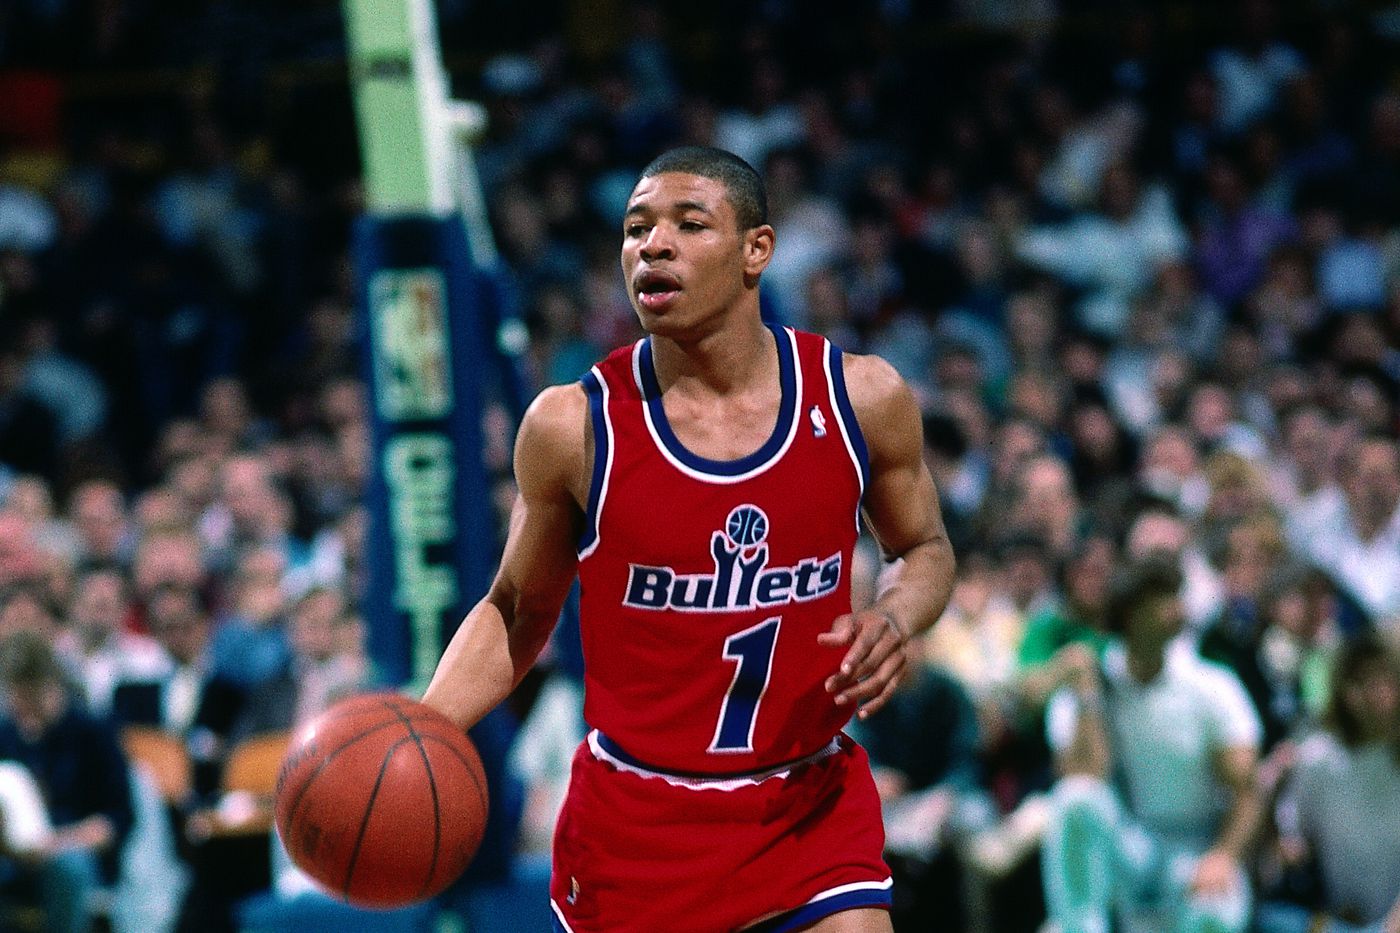 NBA: Bogues' experience should remind Wizards' front office of